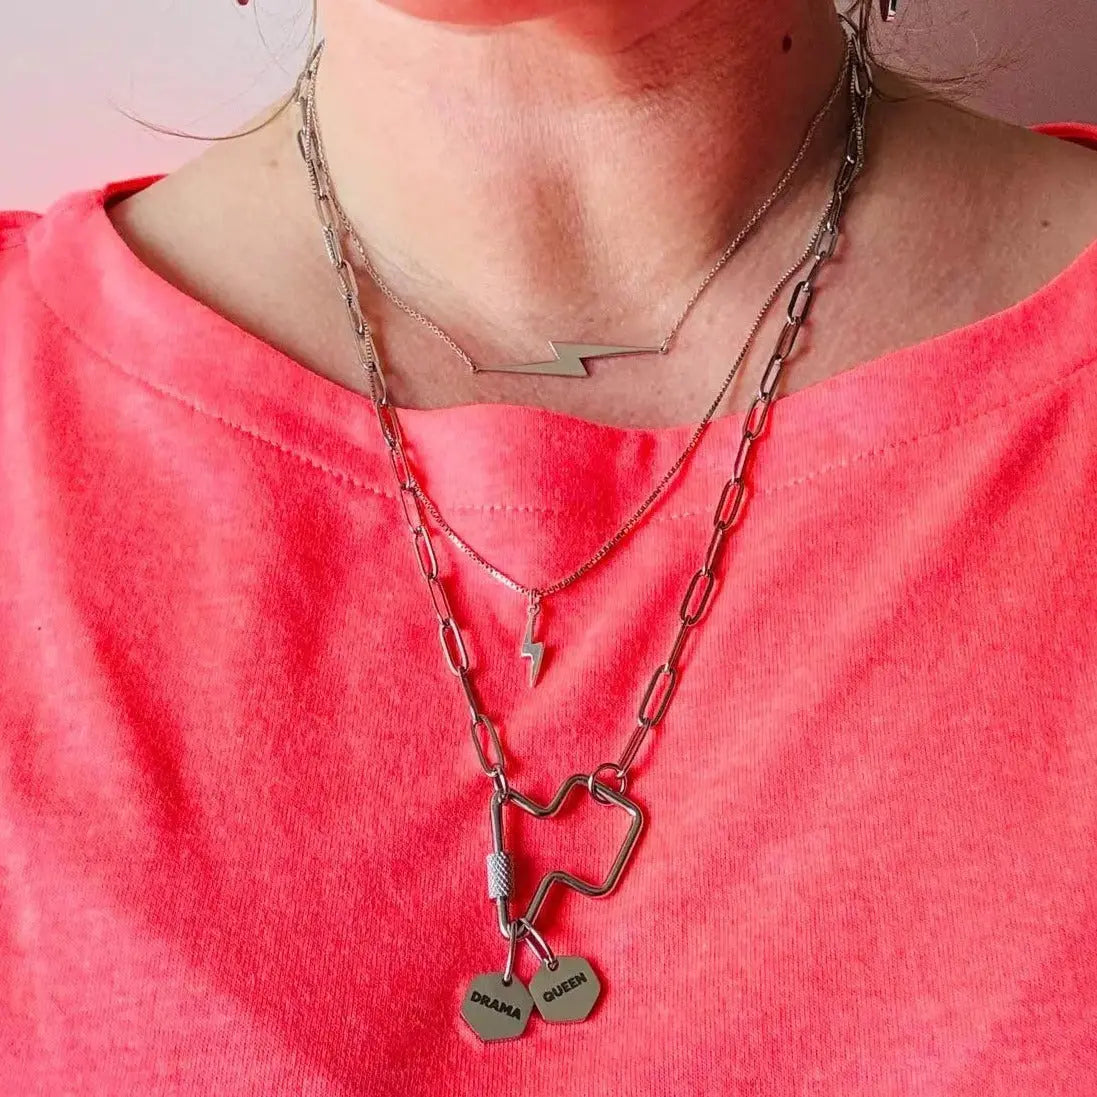 Lightning bolt charm collector necklace - Trend Tonic